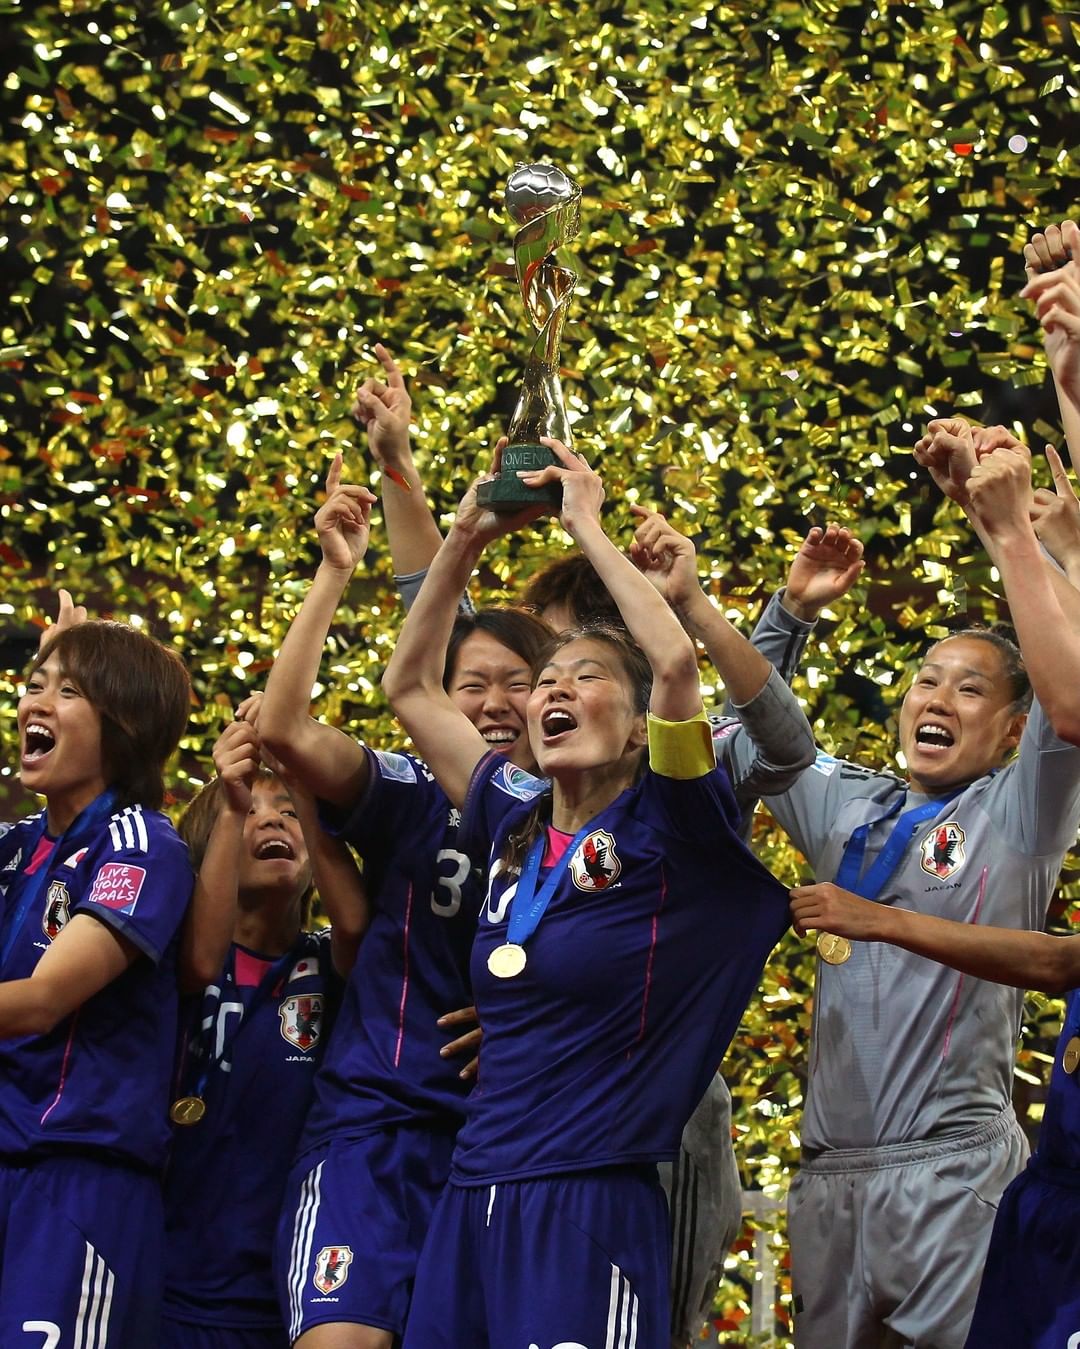 The 2011 FIFA Women's World Cup